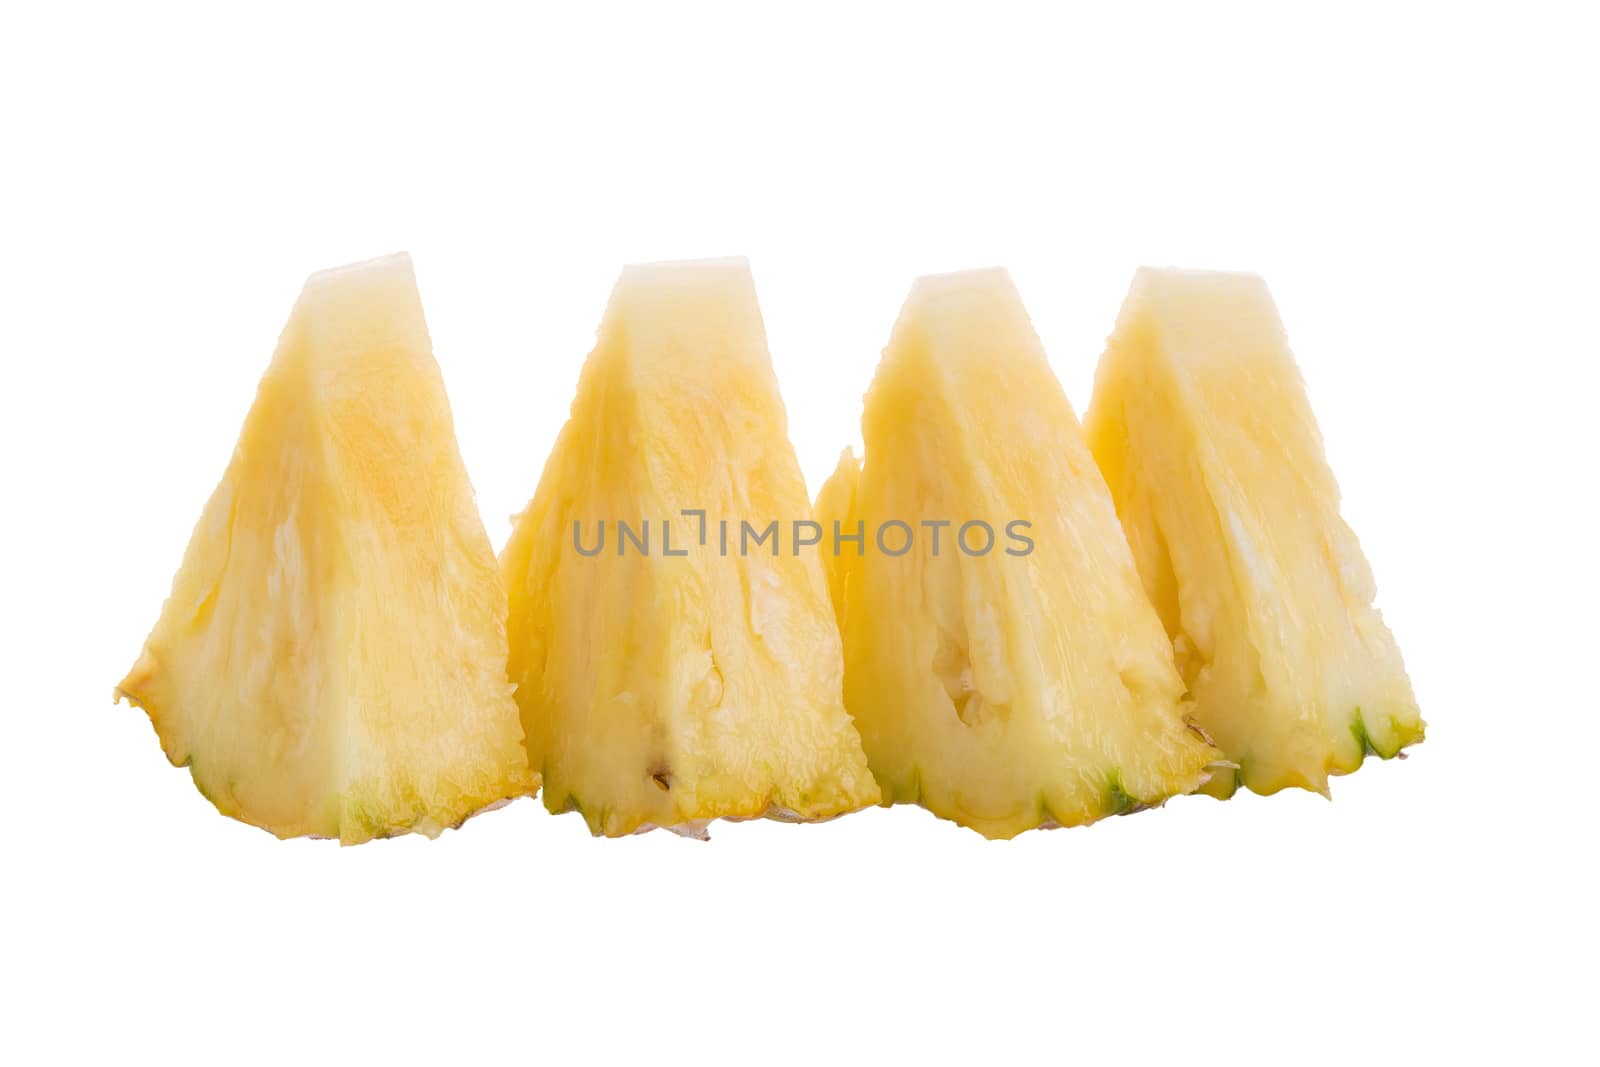 Pineapple slices isolated on a white background.